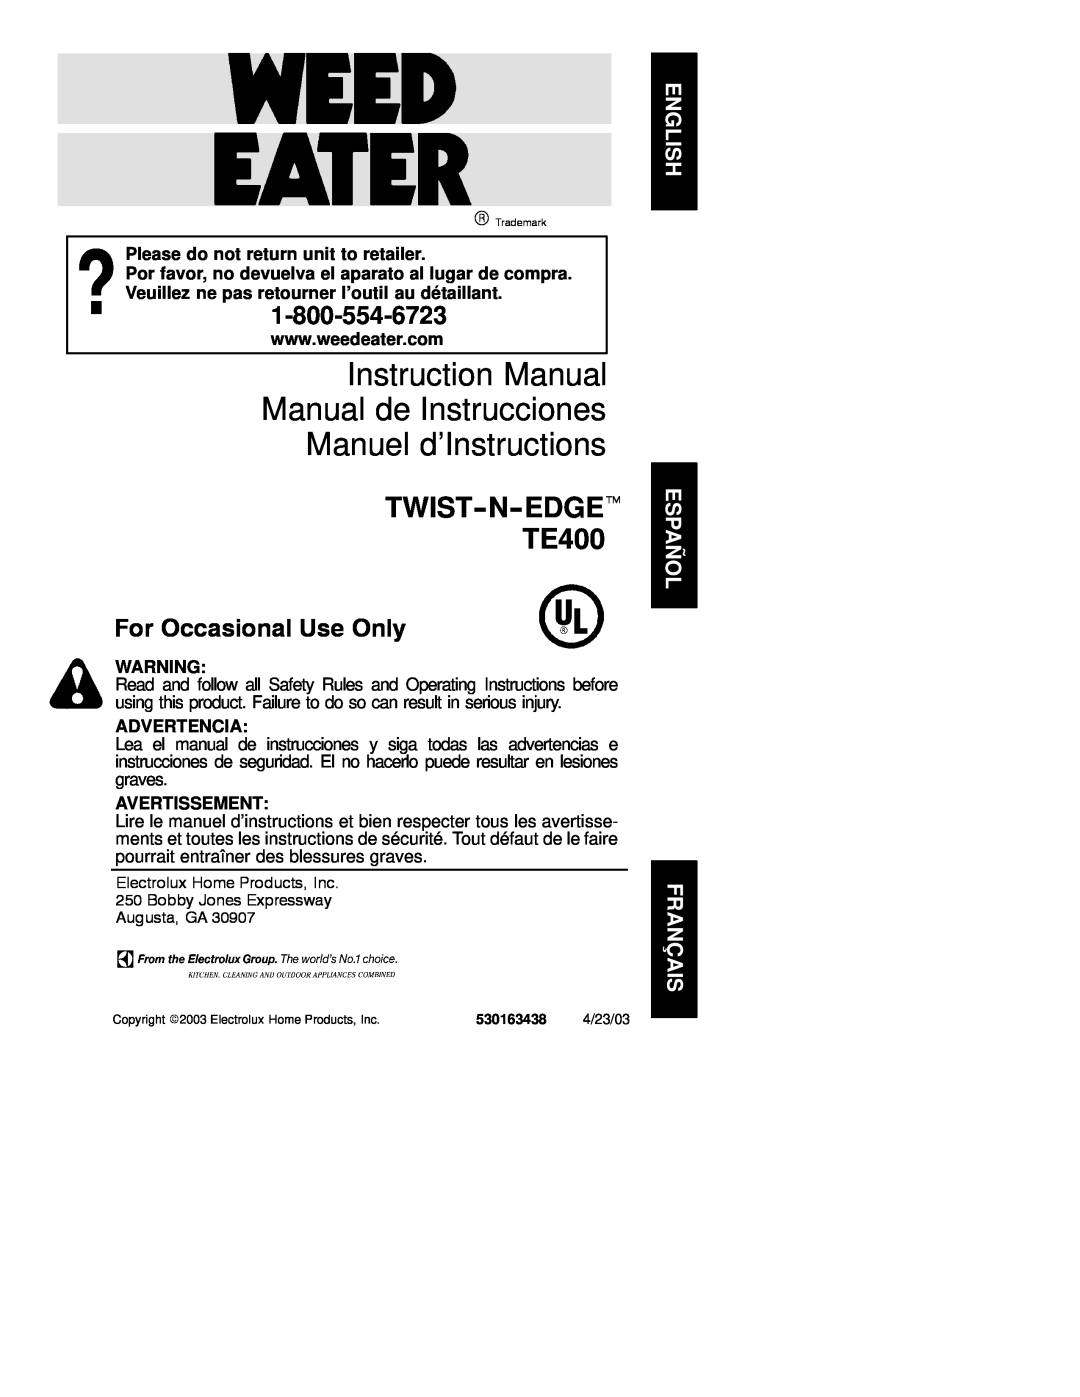 Weed Eater 530163438 instruction manual Please do not return unit to retailer, Advertencia, Avertissement 